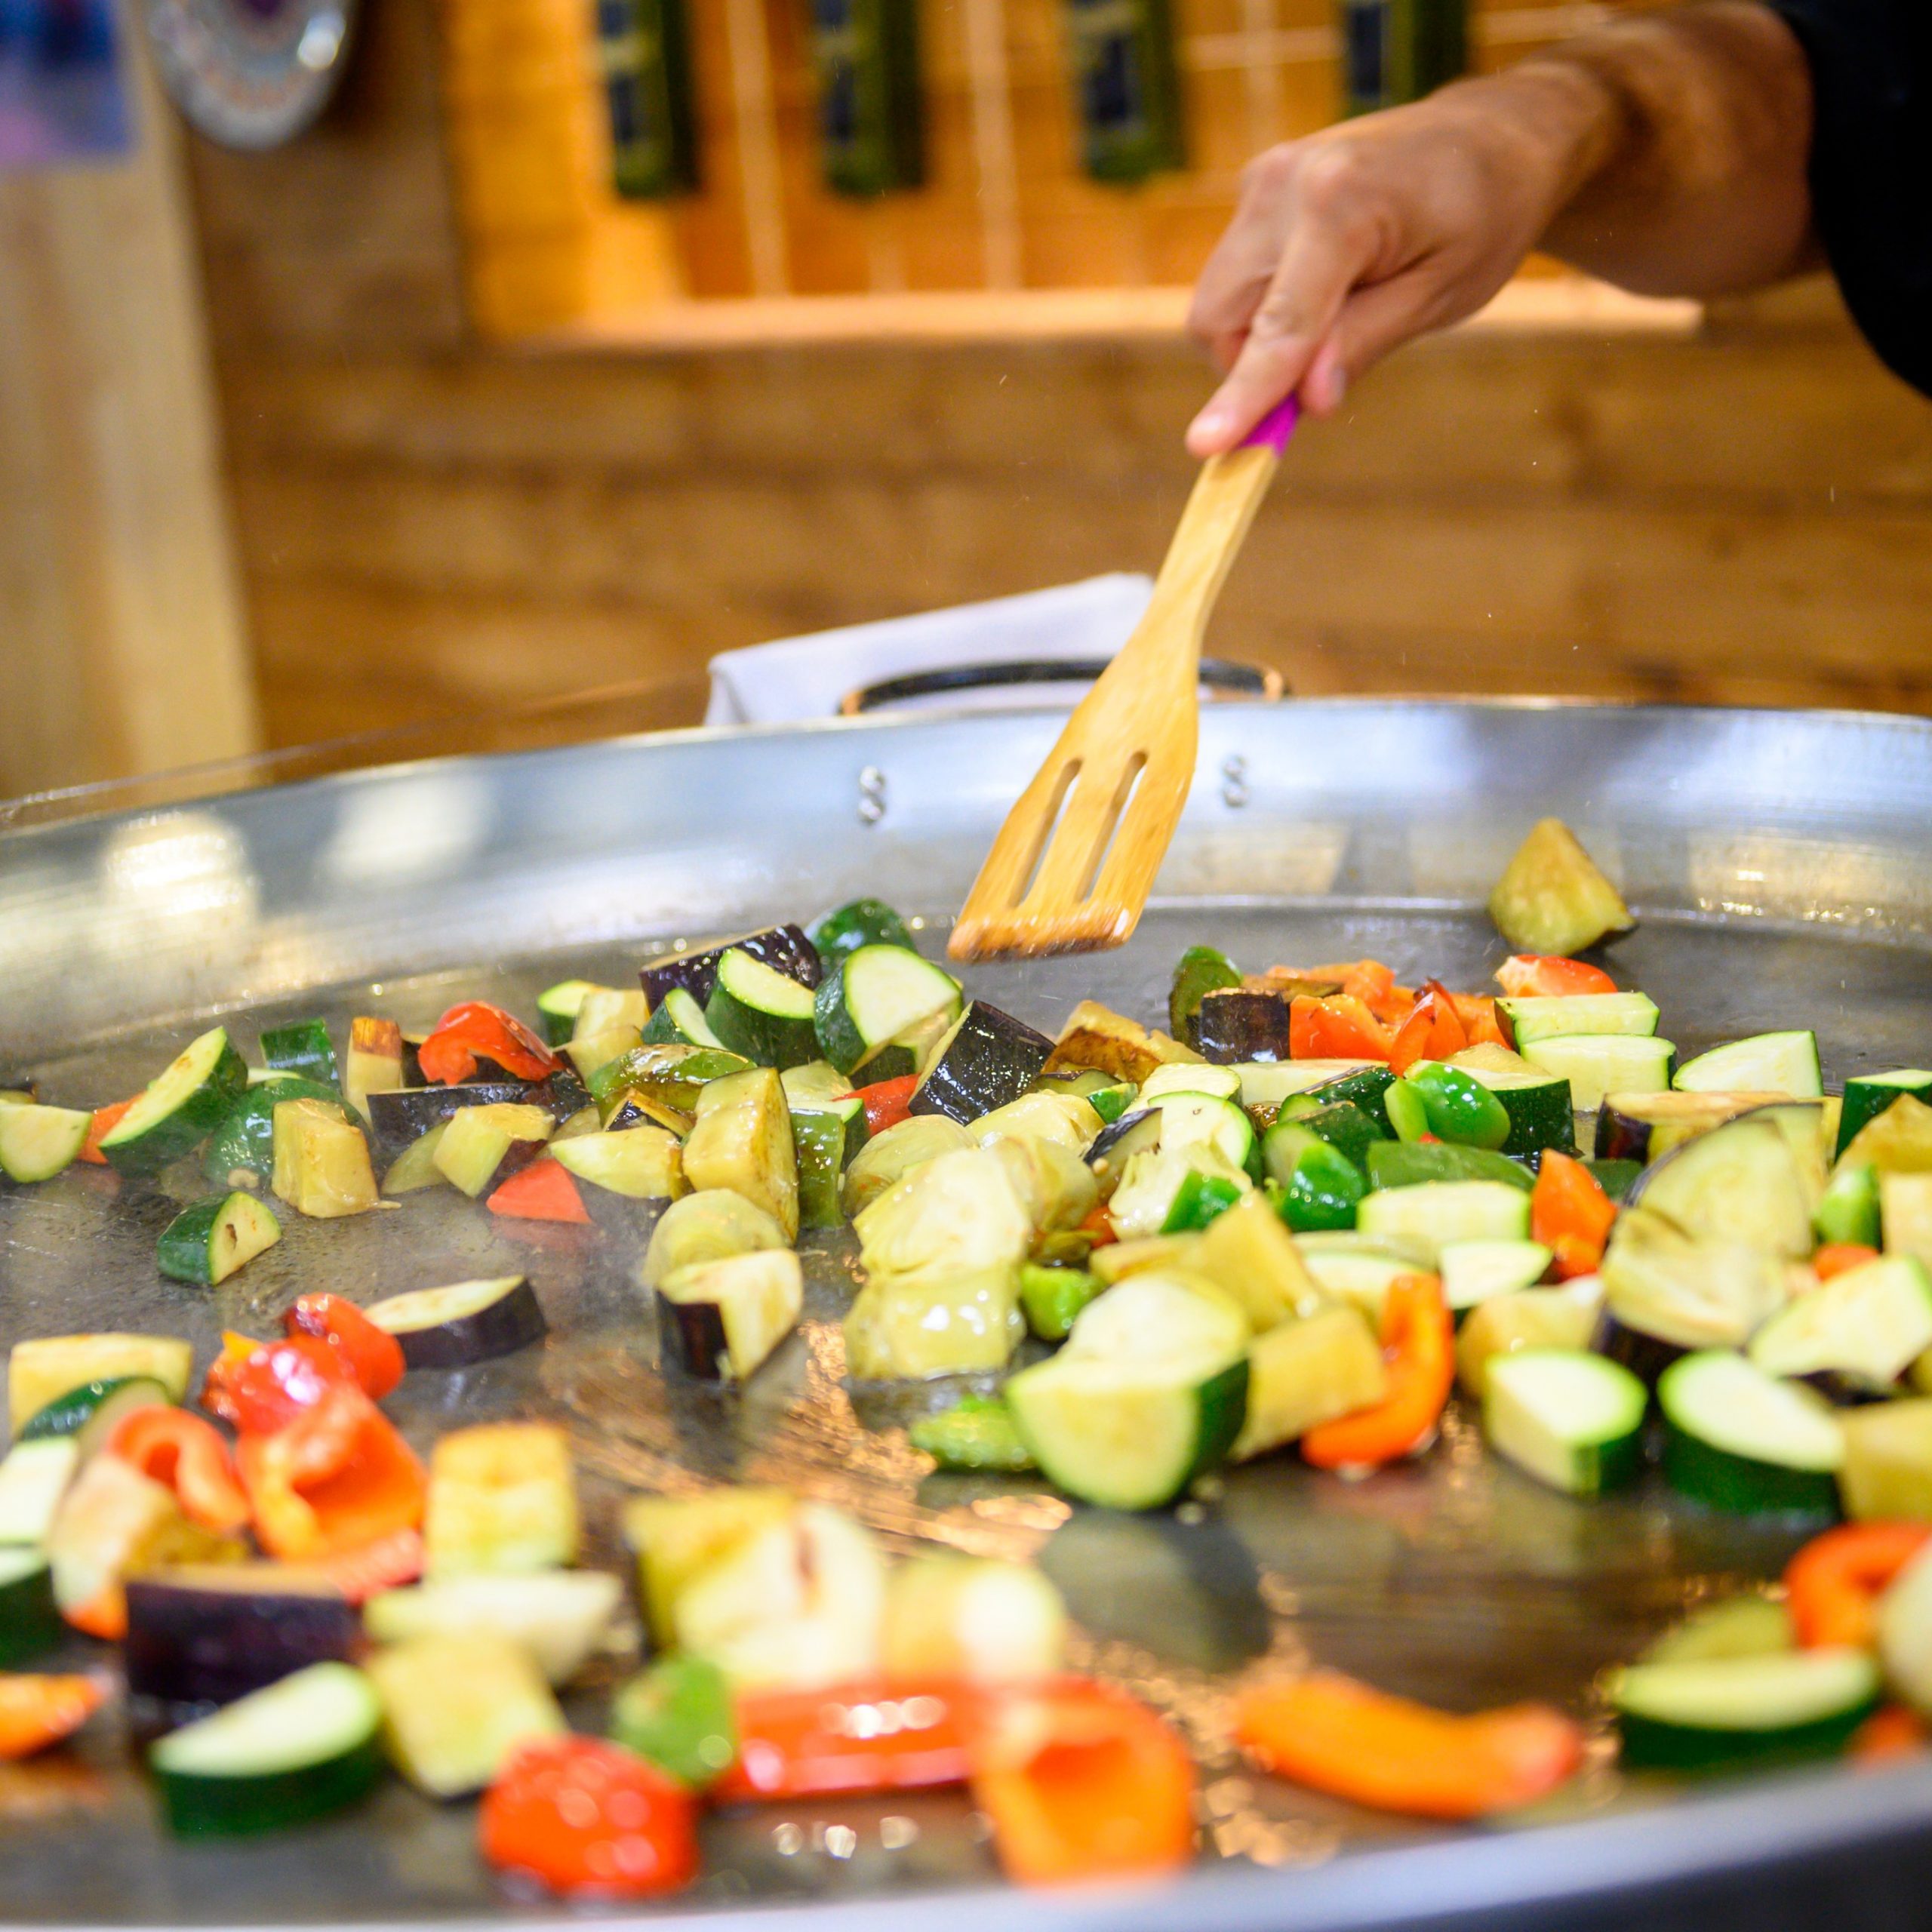 Large pan in which courgettes, tomatoes and more are shallow-fried